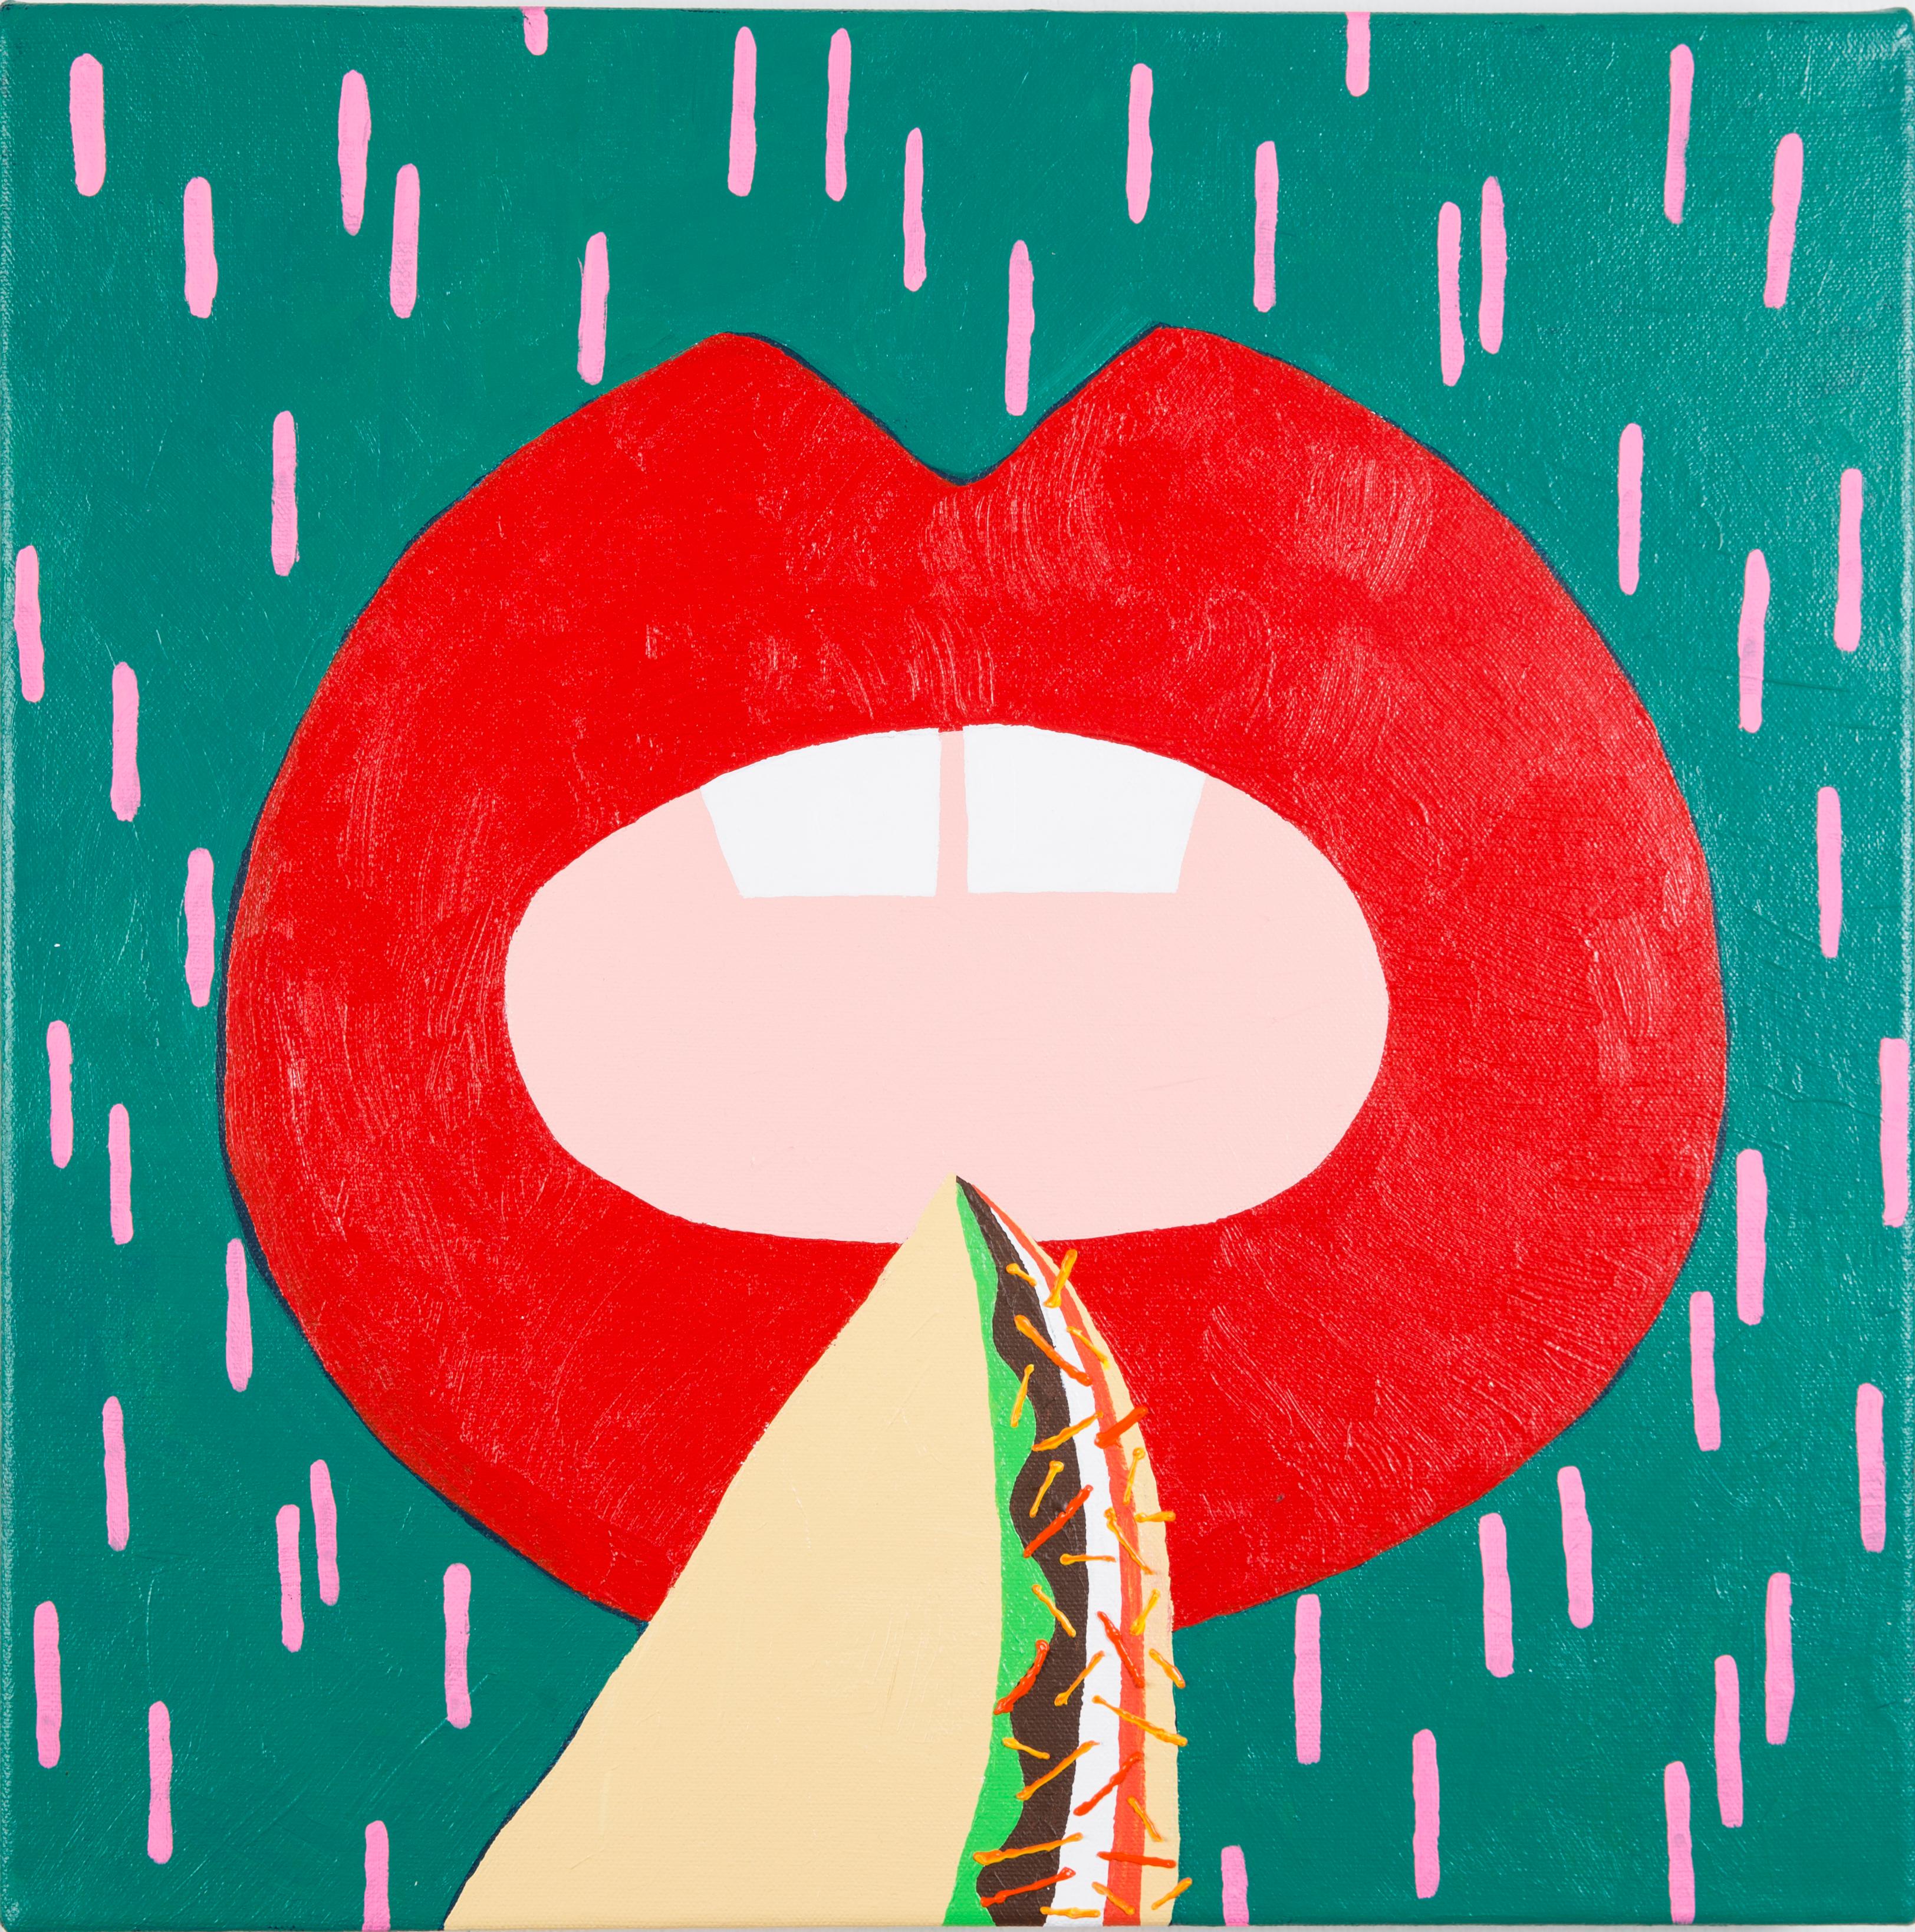 TUESDAY - Pop Art Lips Eating Taco - Green, Red, Pink - Painting by Elizabeth Winnel